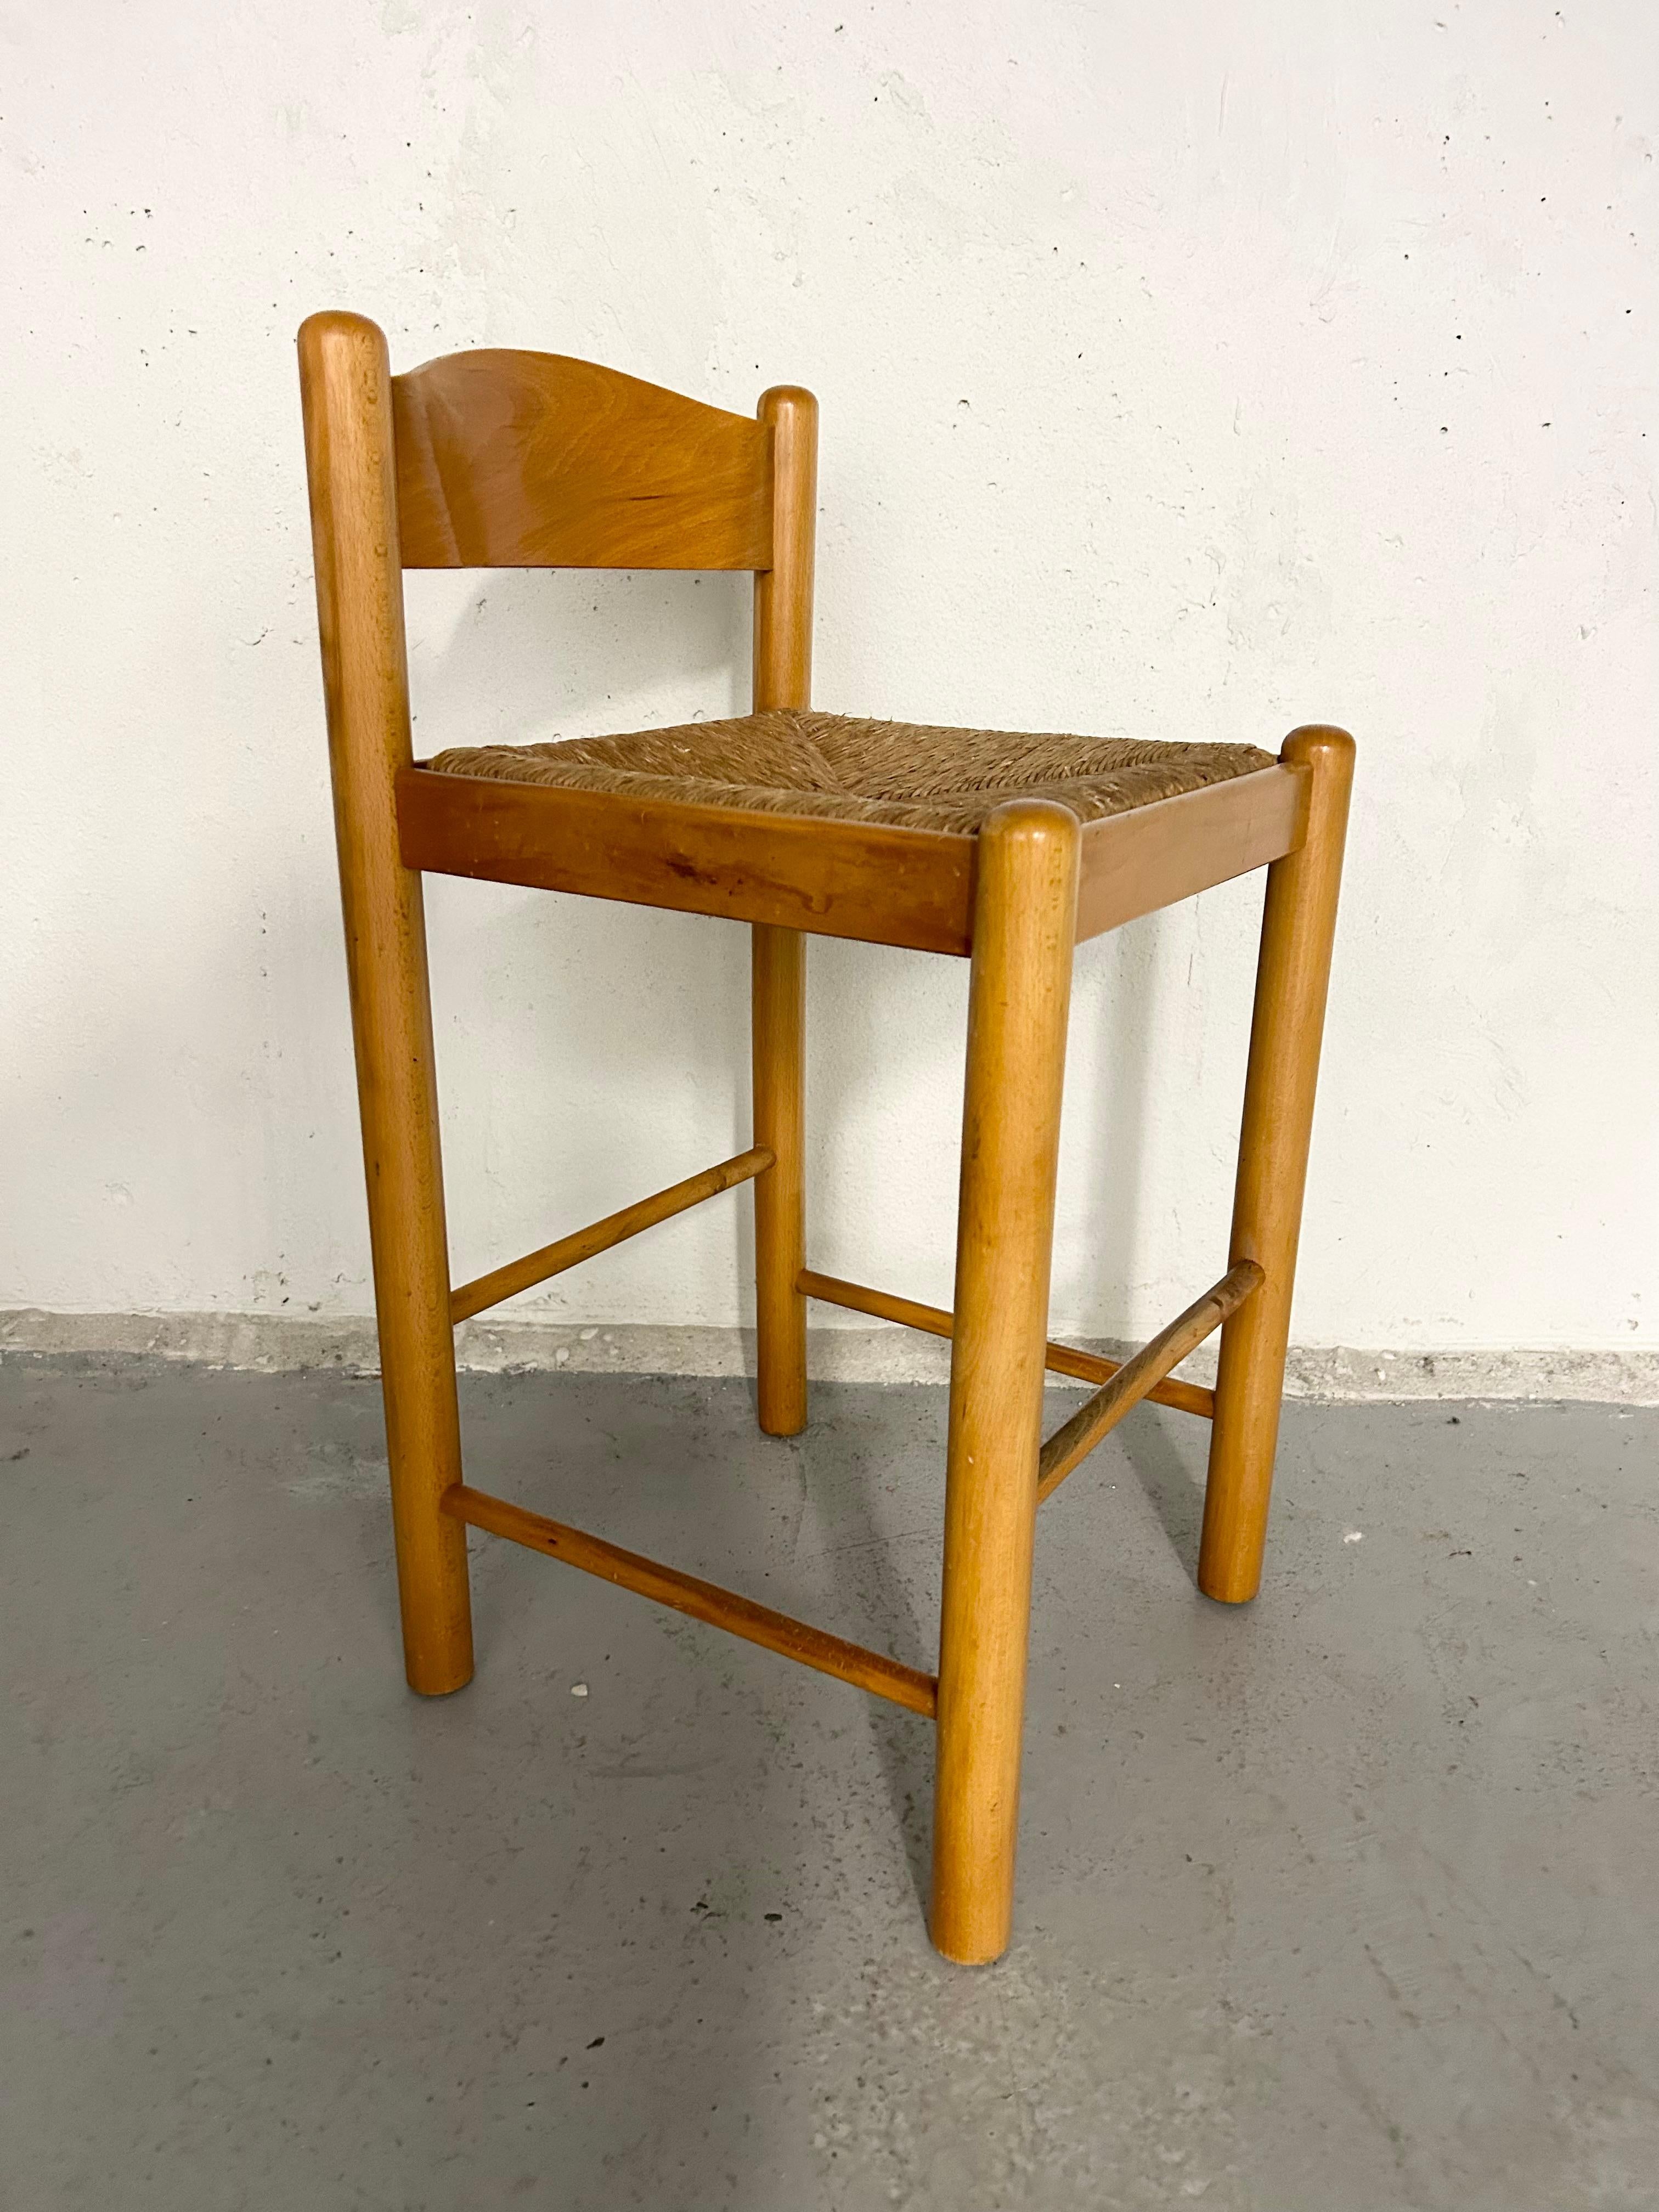 Vintage 1960s wood counter height stool with woven rush seat and cylinder legs. Normal vintage wear. Small marks on wood 